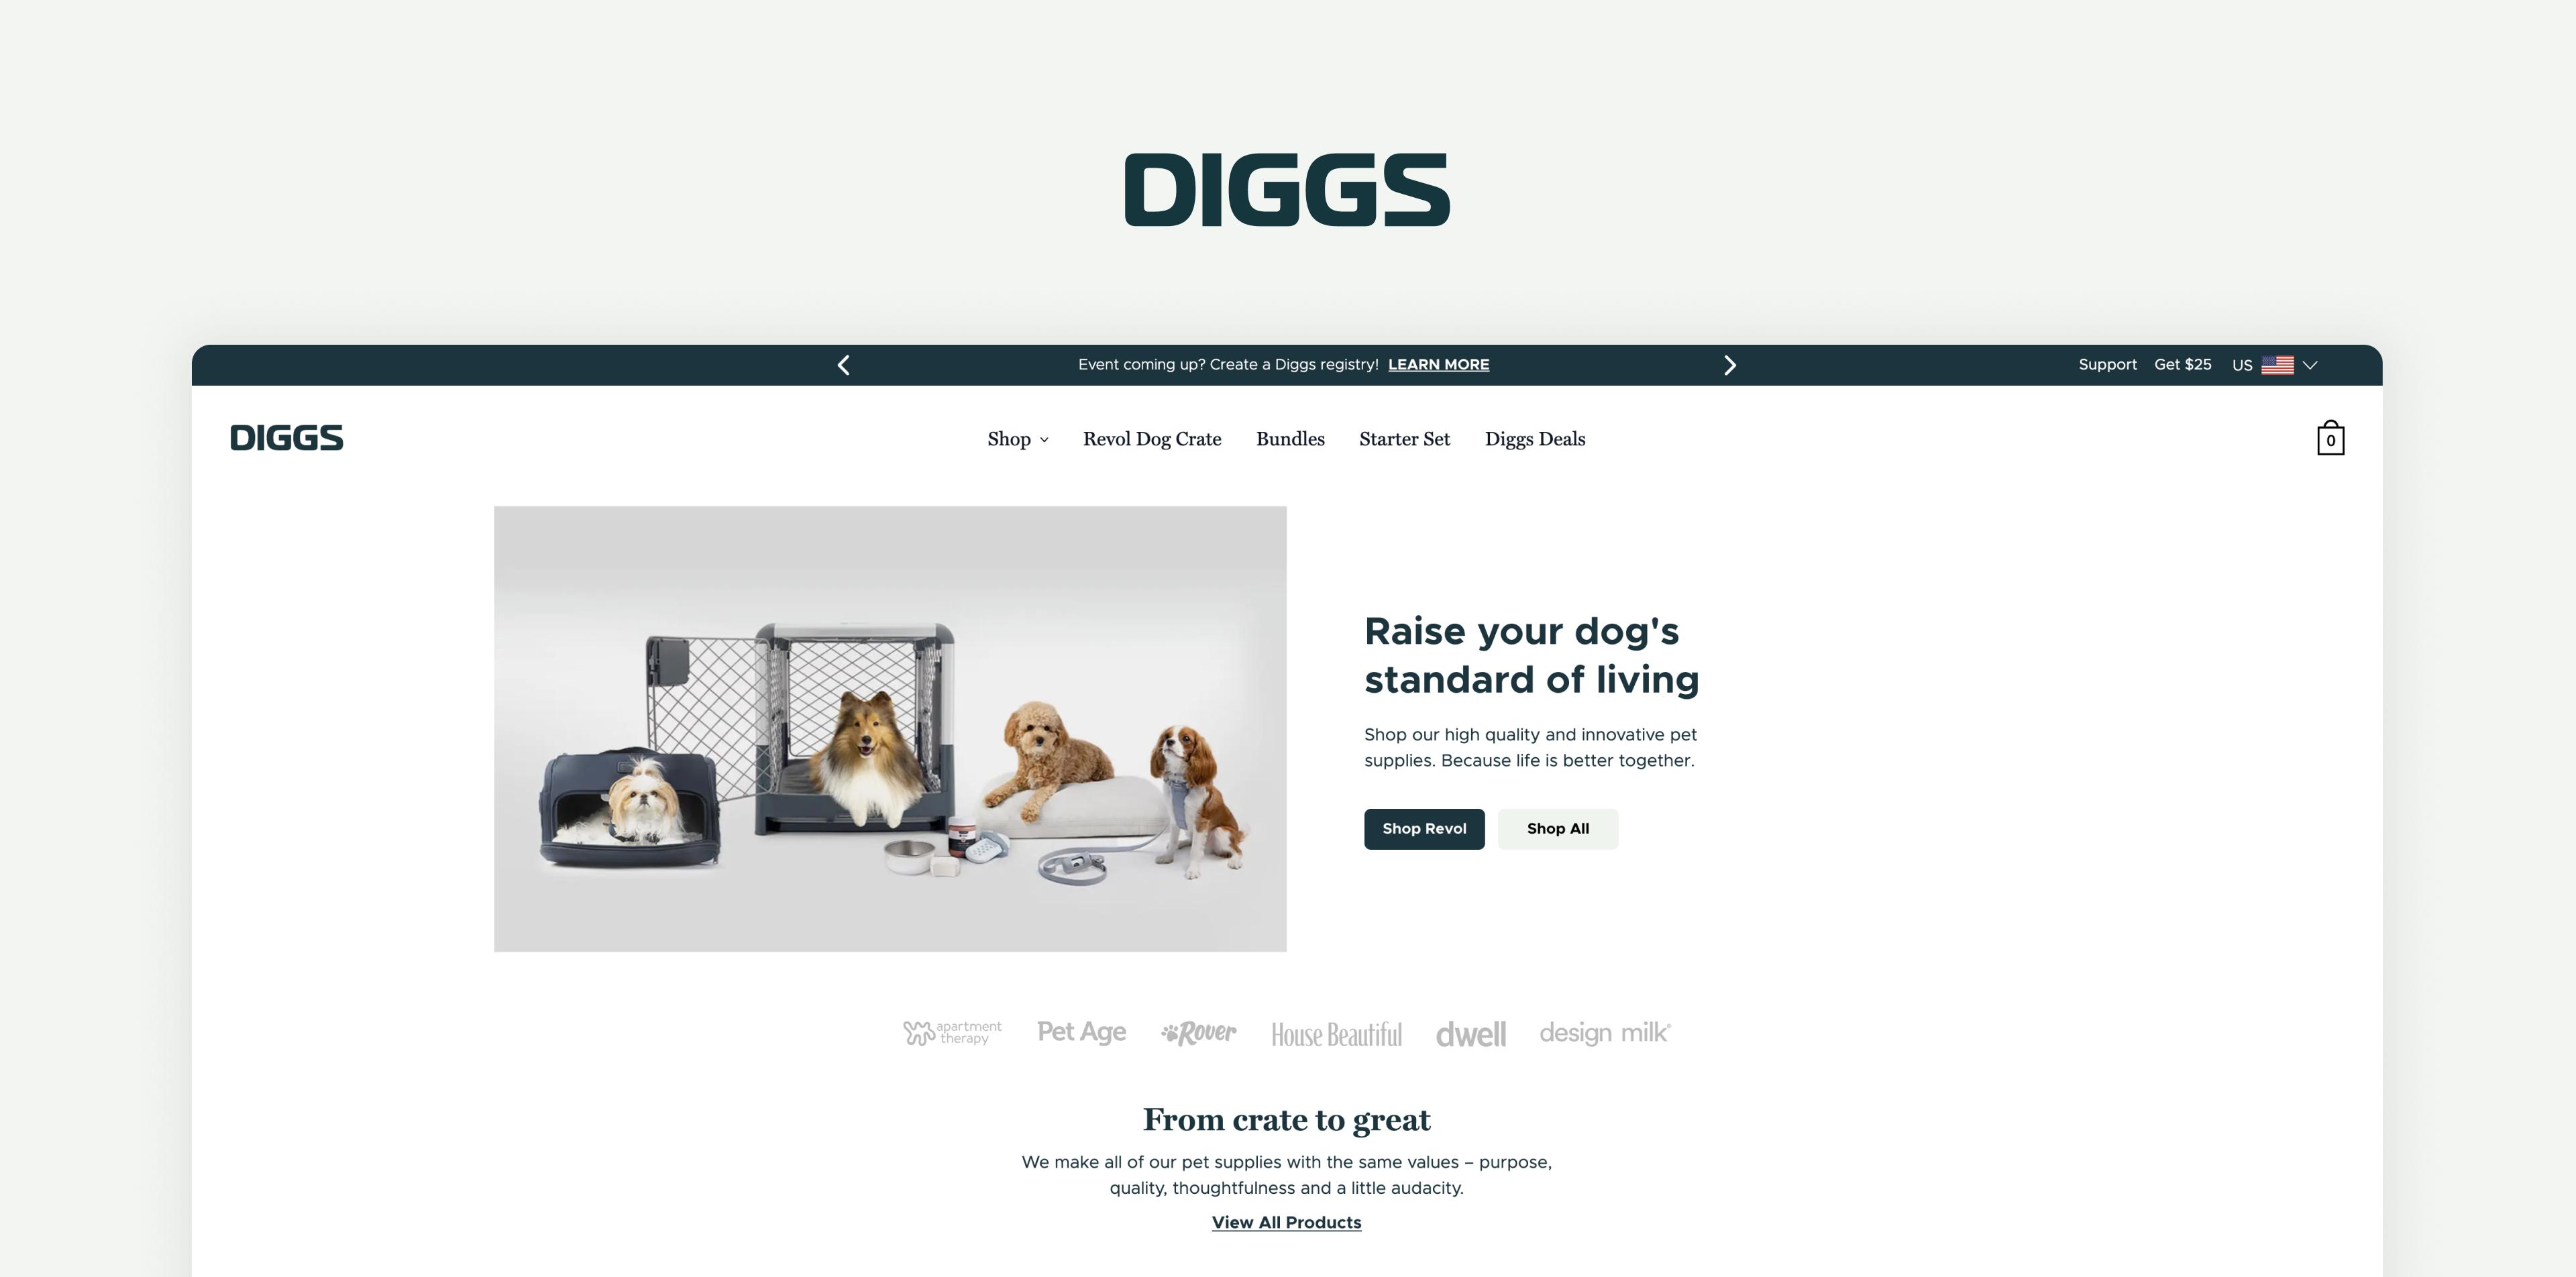 Sogody designs and builds features for Diggs' e-commerce platform